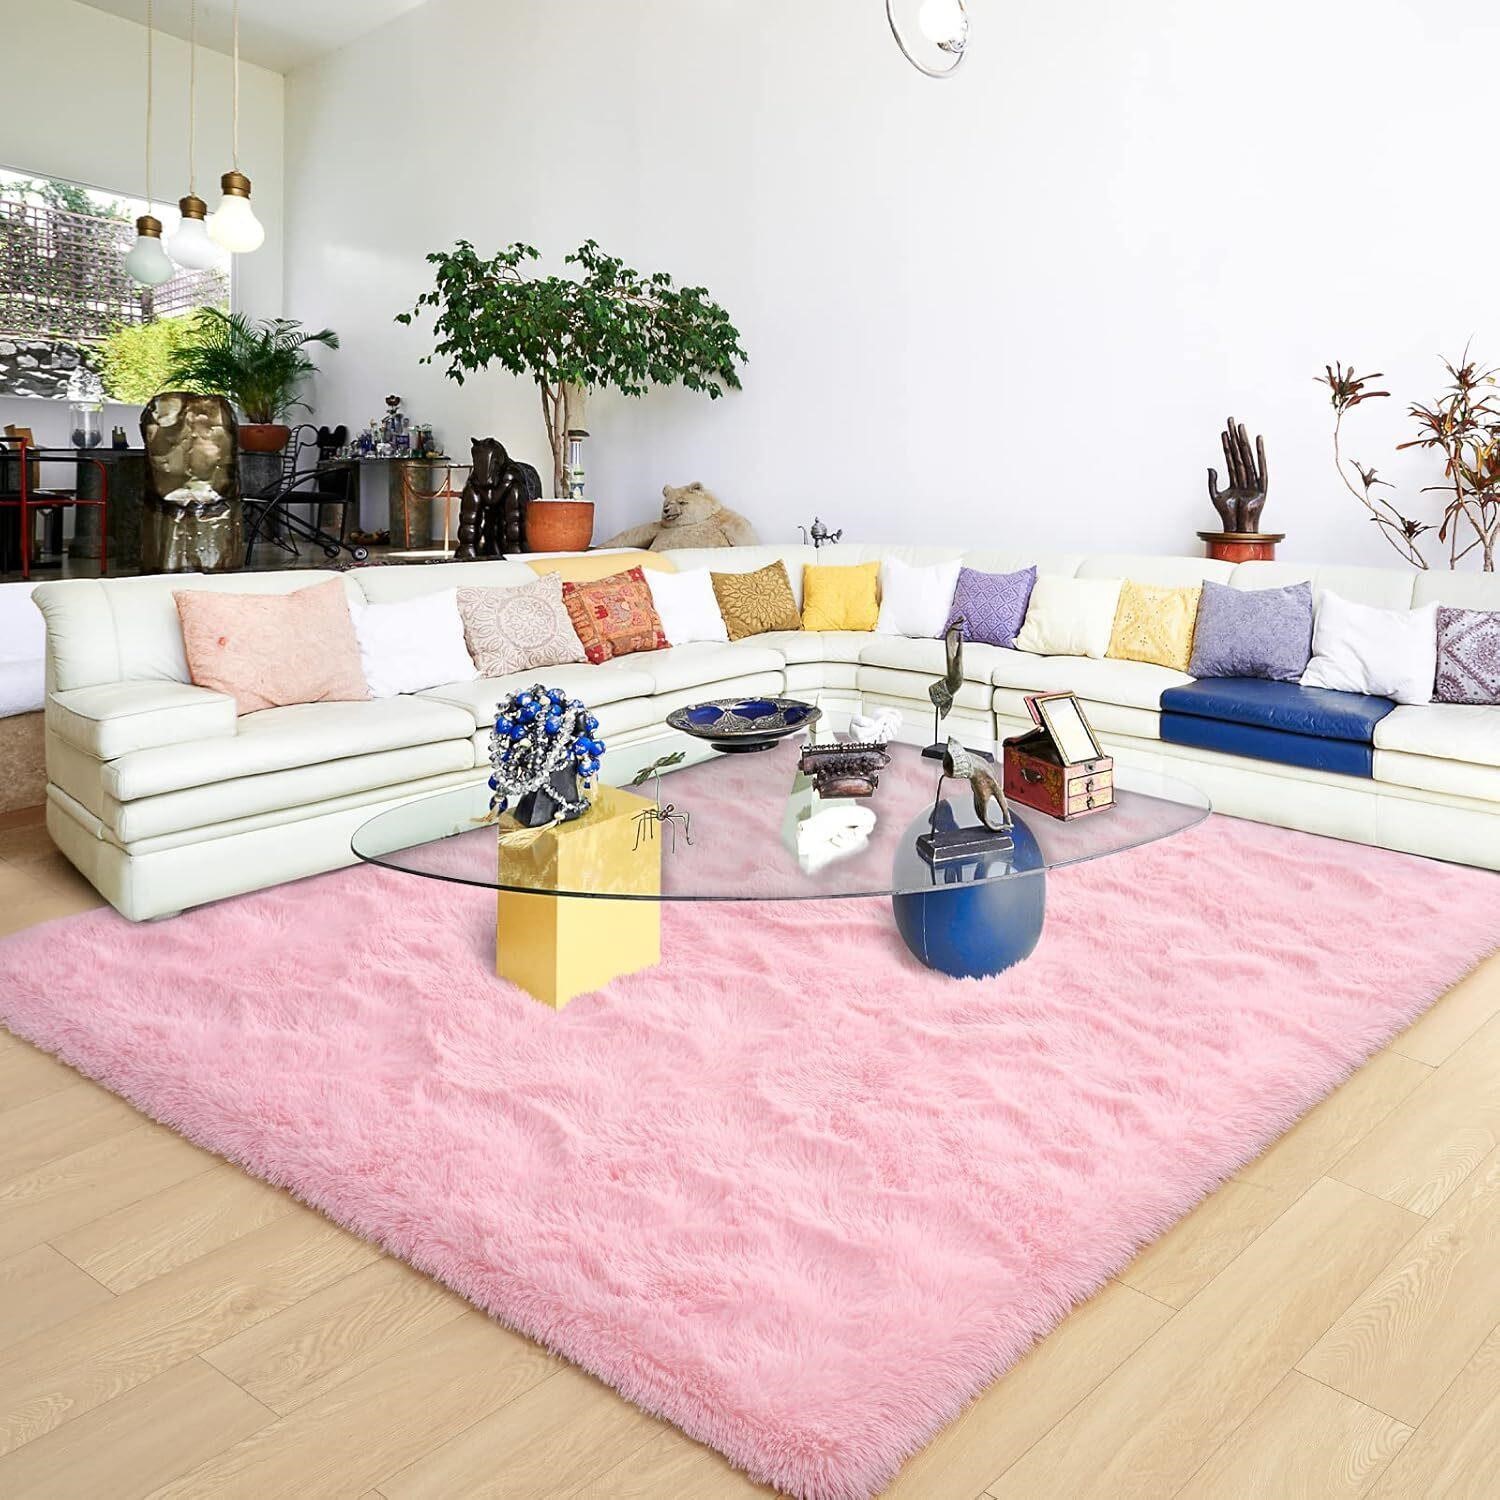 Ultra Soft Pink Rugs for Bedroom 7x10 Feet